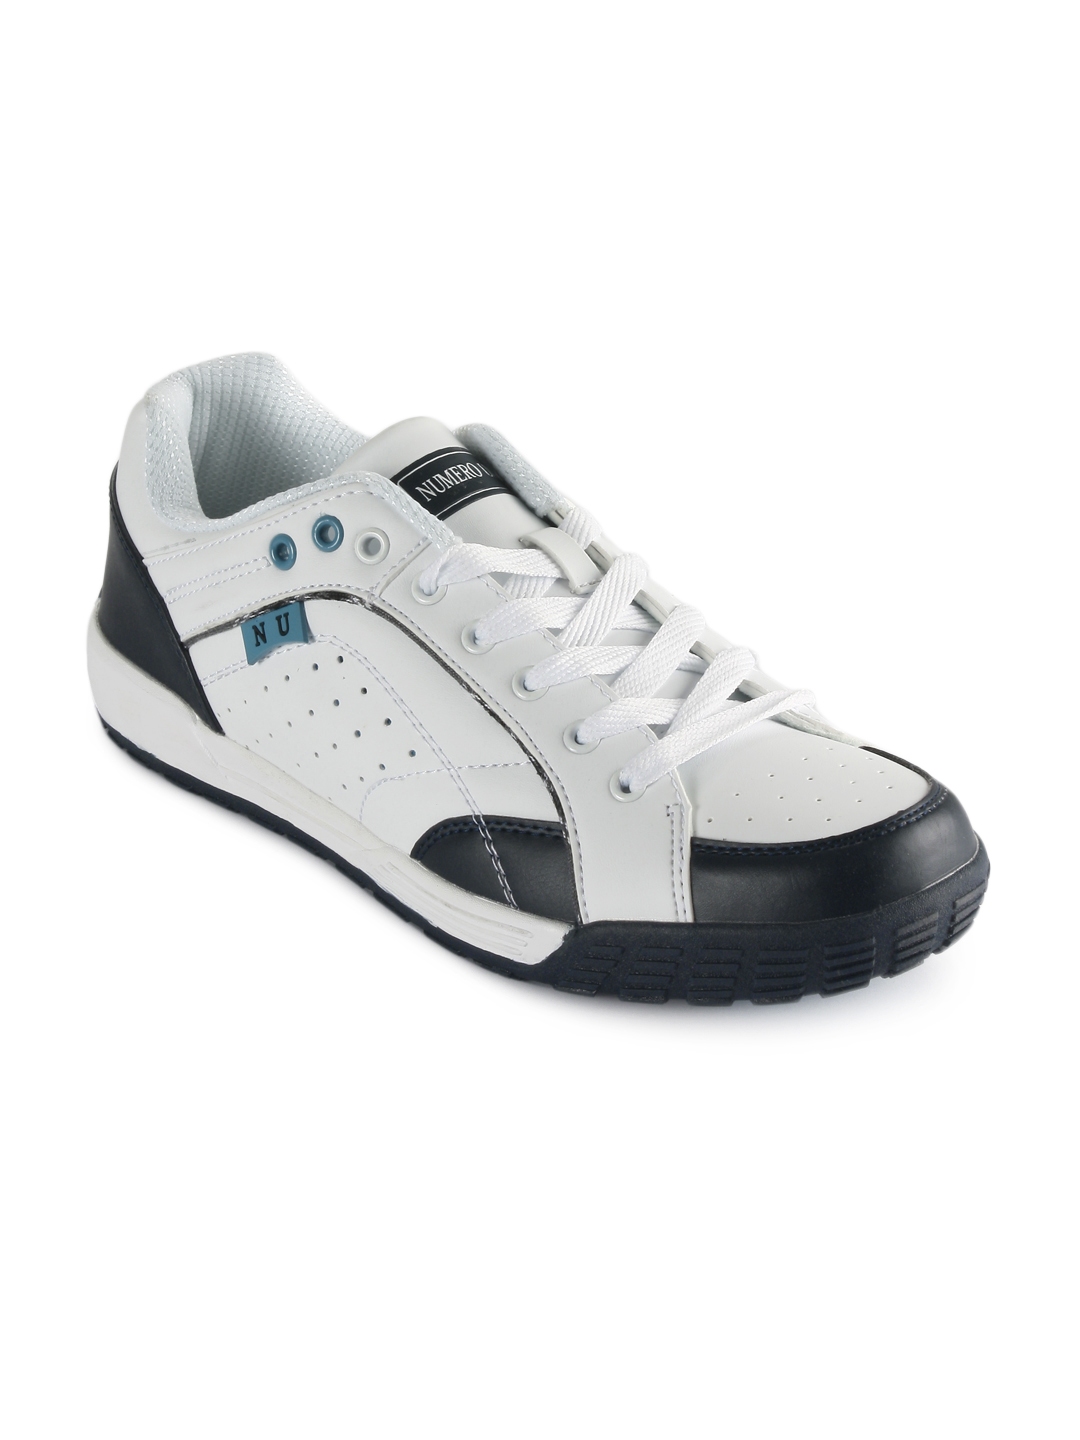 Buy Numero Uno Men White Shoes - Casual Shoes for Men 30240 | Myntra